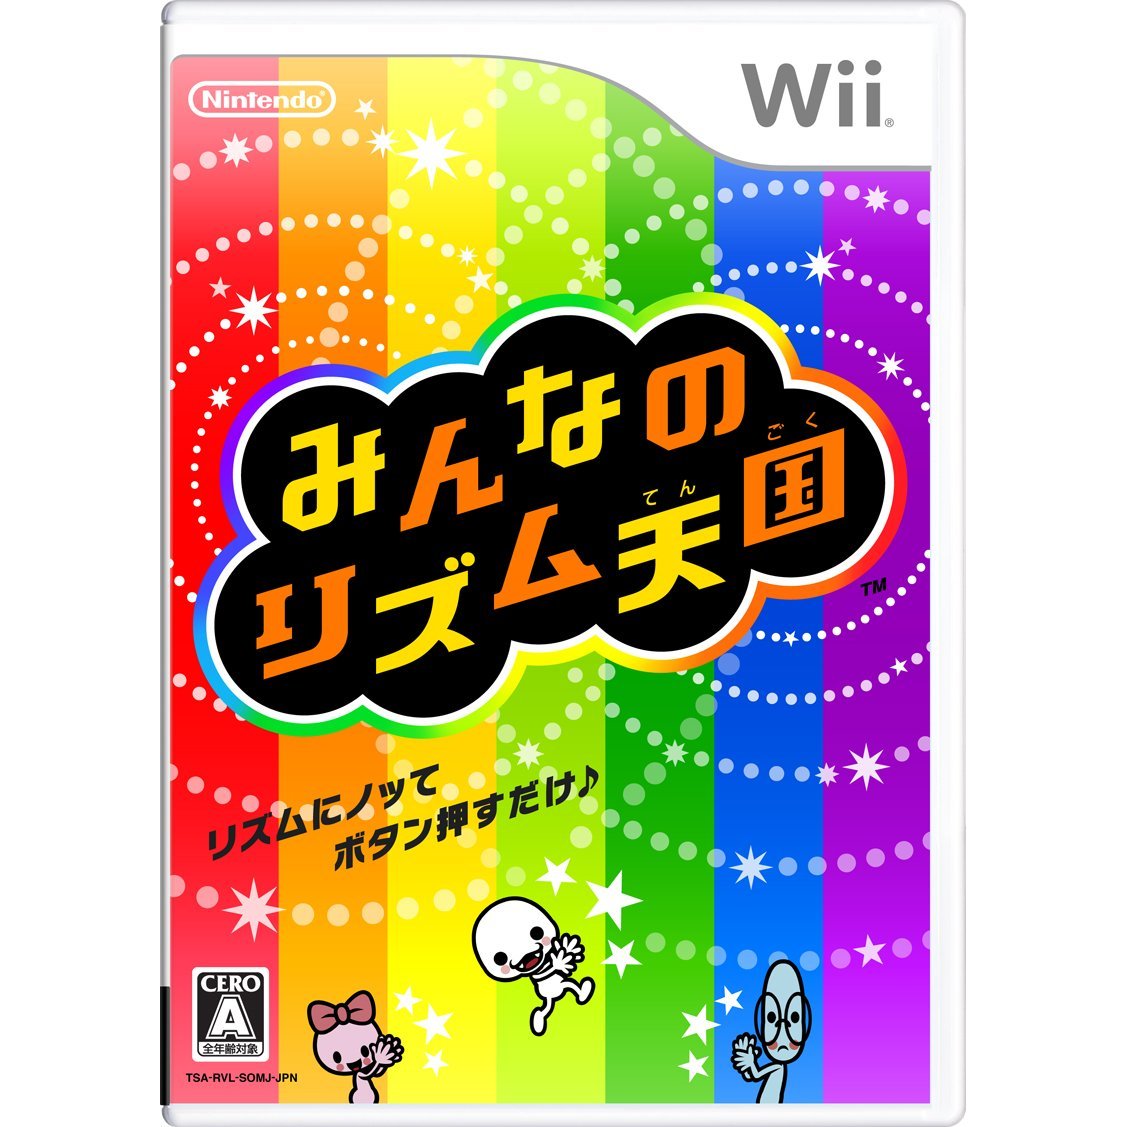 Wii みんなのリズム天国 - 家庭用ゲームソフト